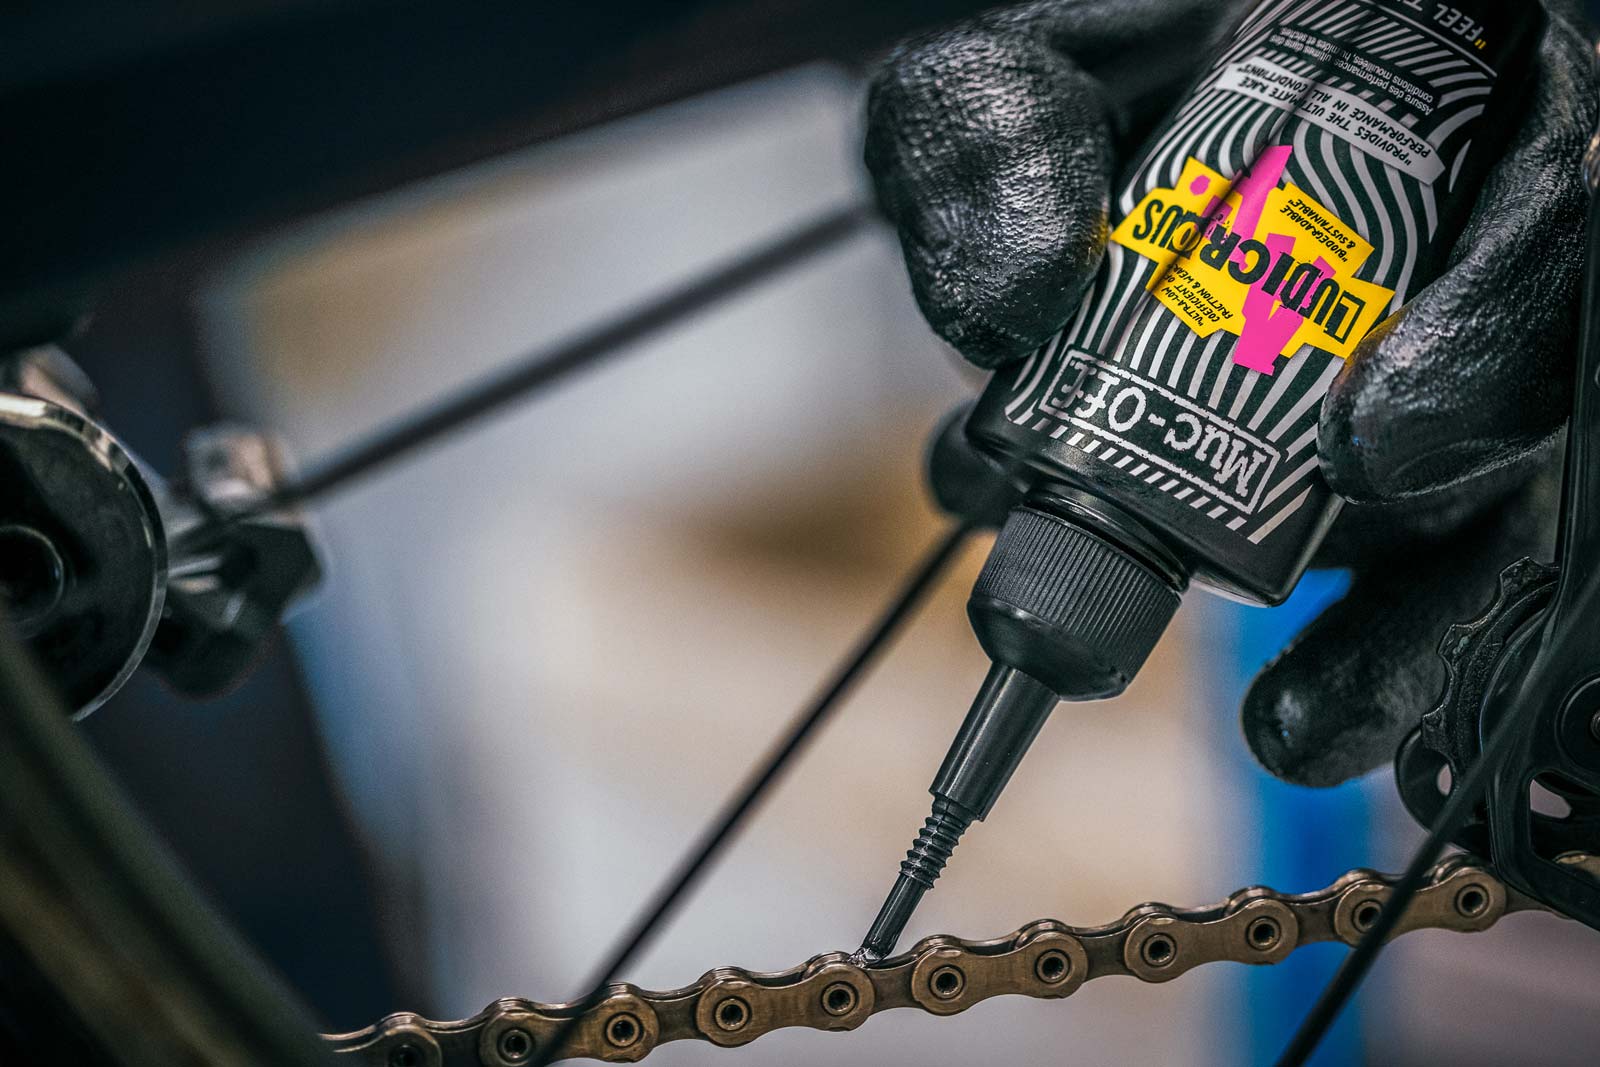 muc-off ludicrous af chain lube worlds fastest durable sustainable